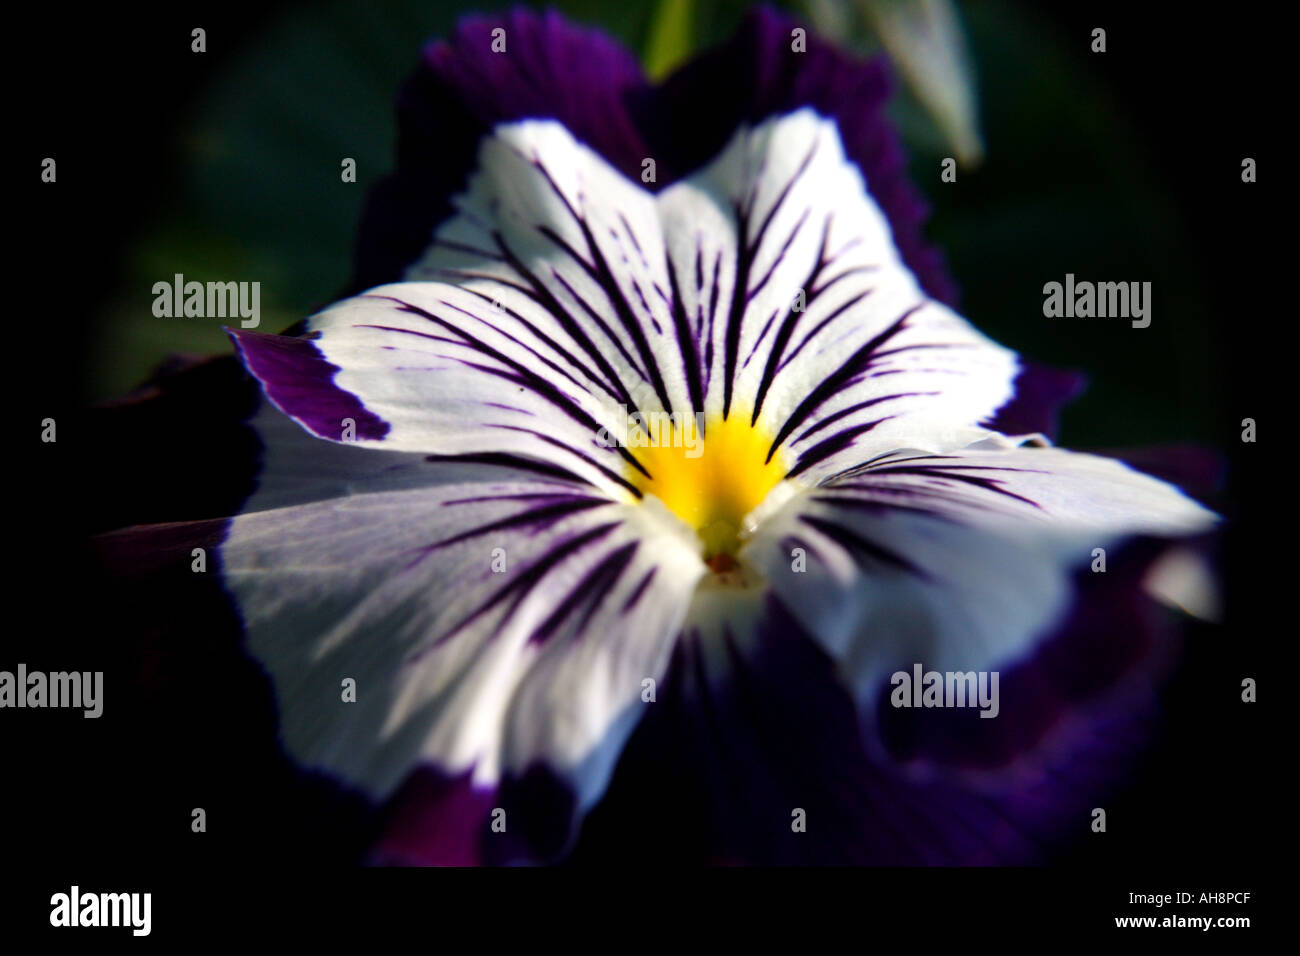 A PURPLE AND WHITE PANSY BAPD 2610 Stock Photo